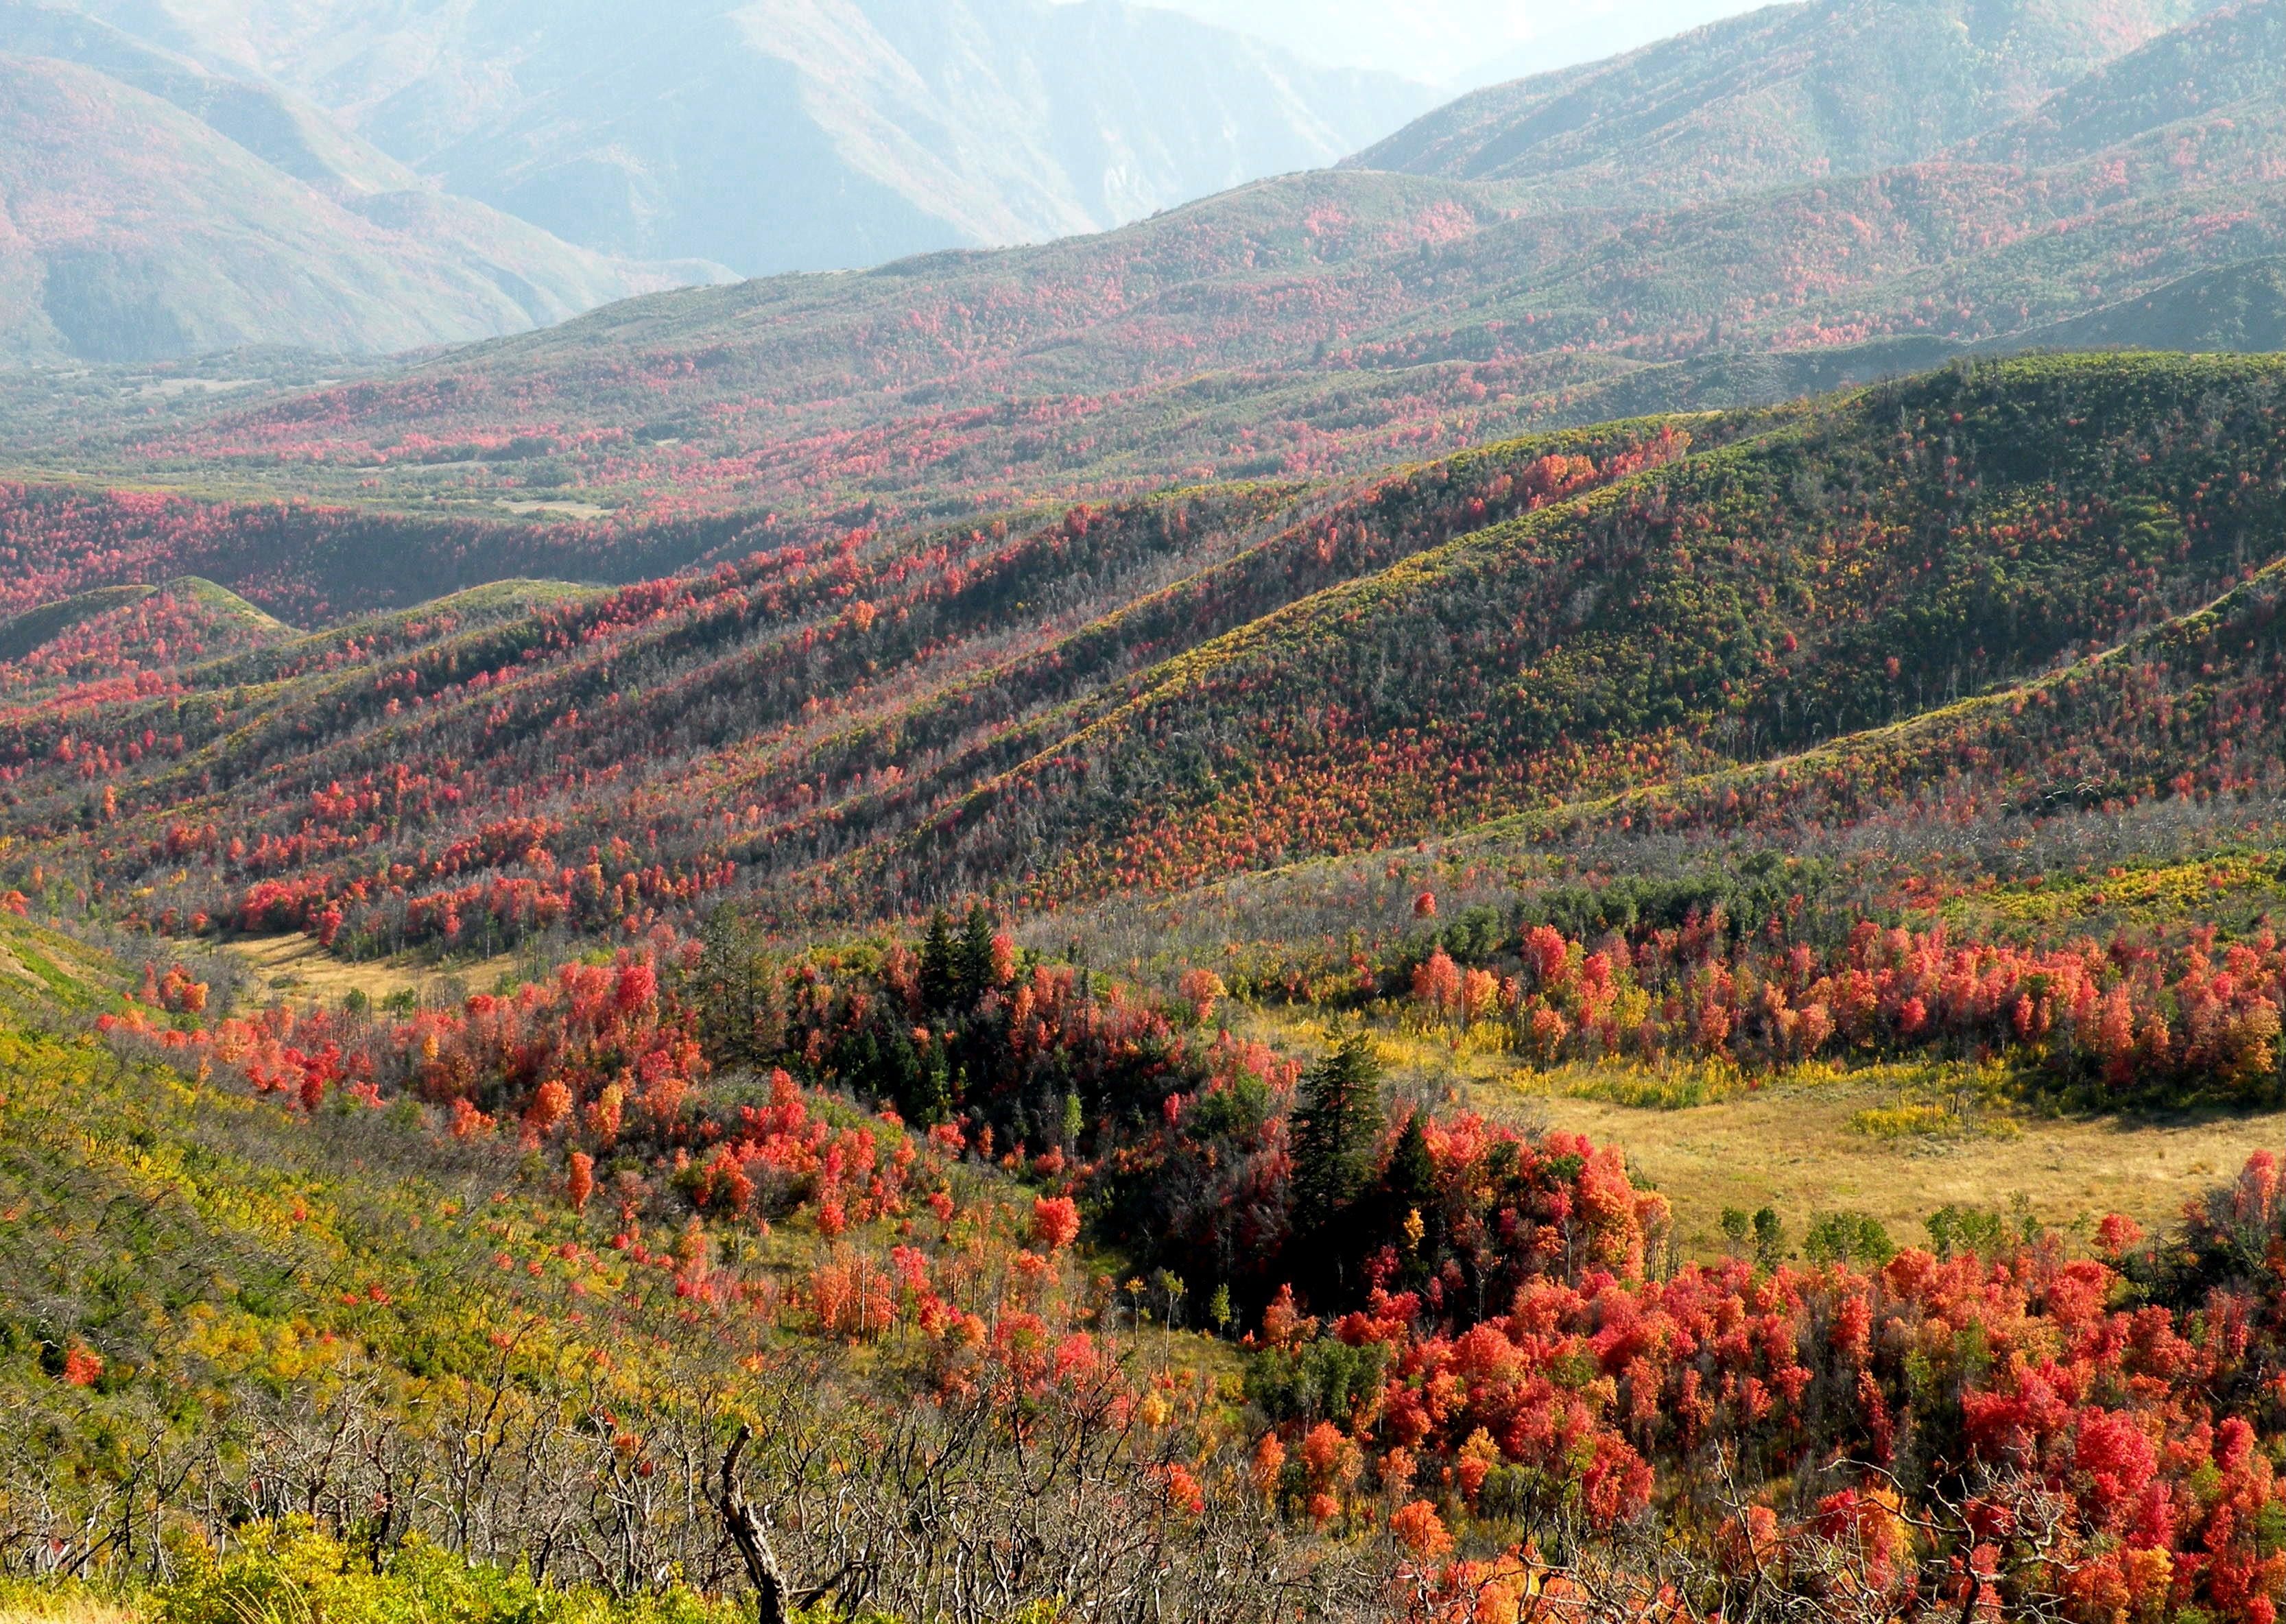 Red and orange trees cover a mountain valley.